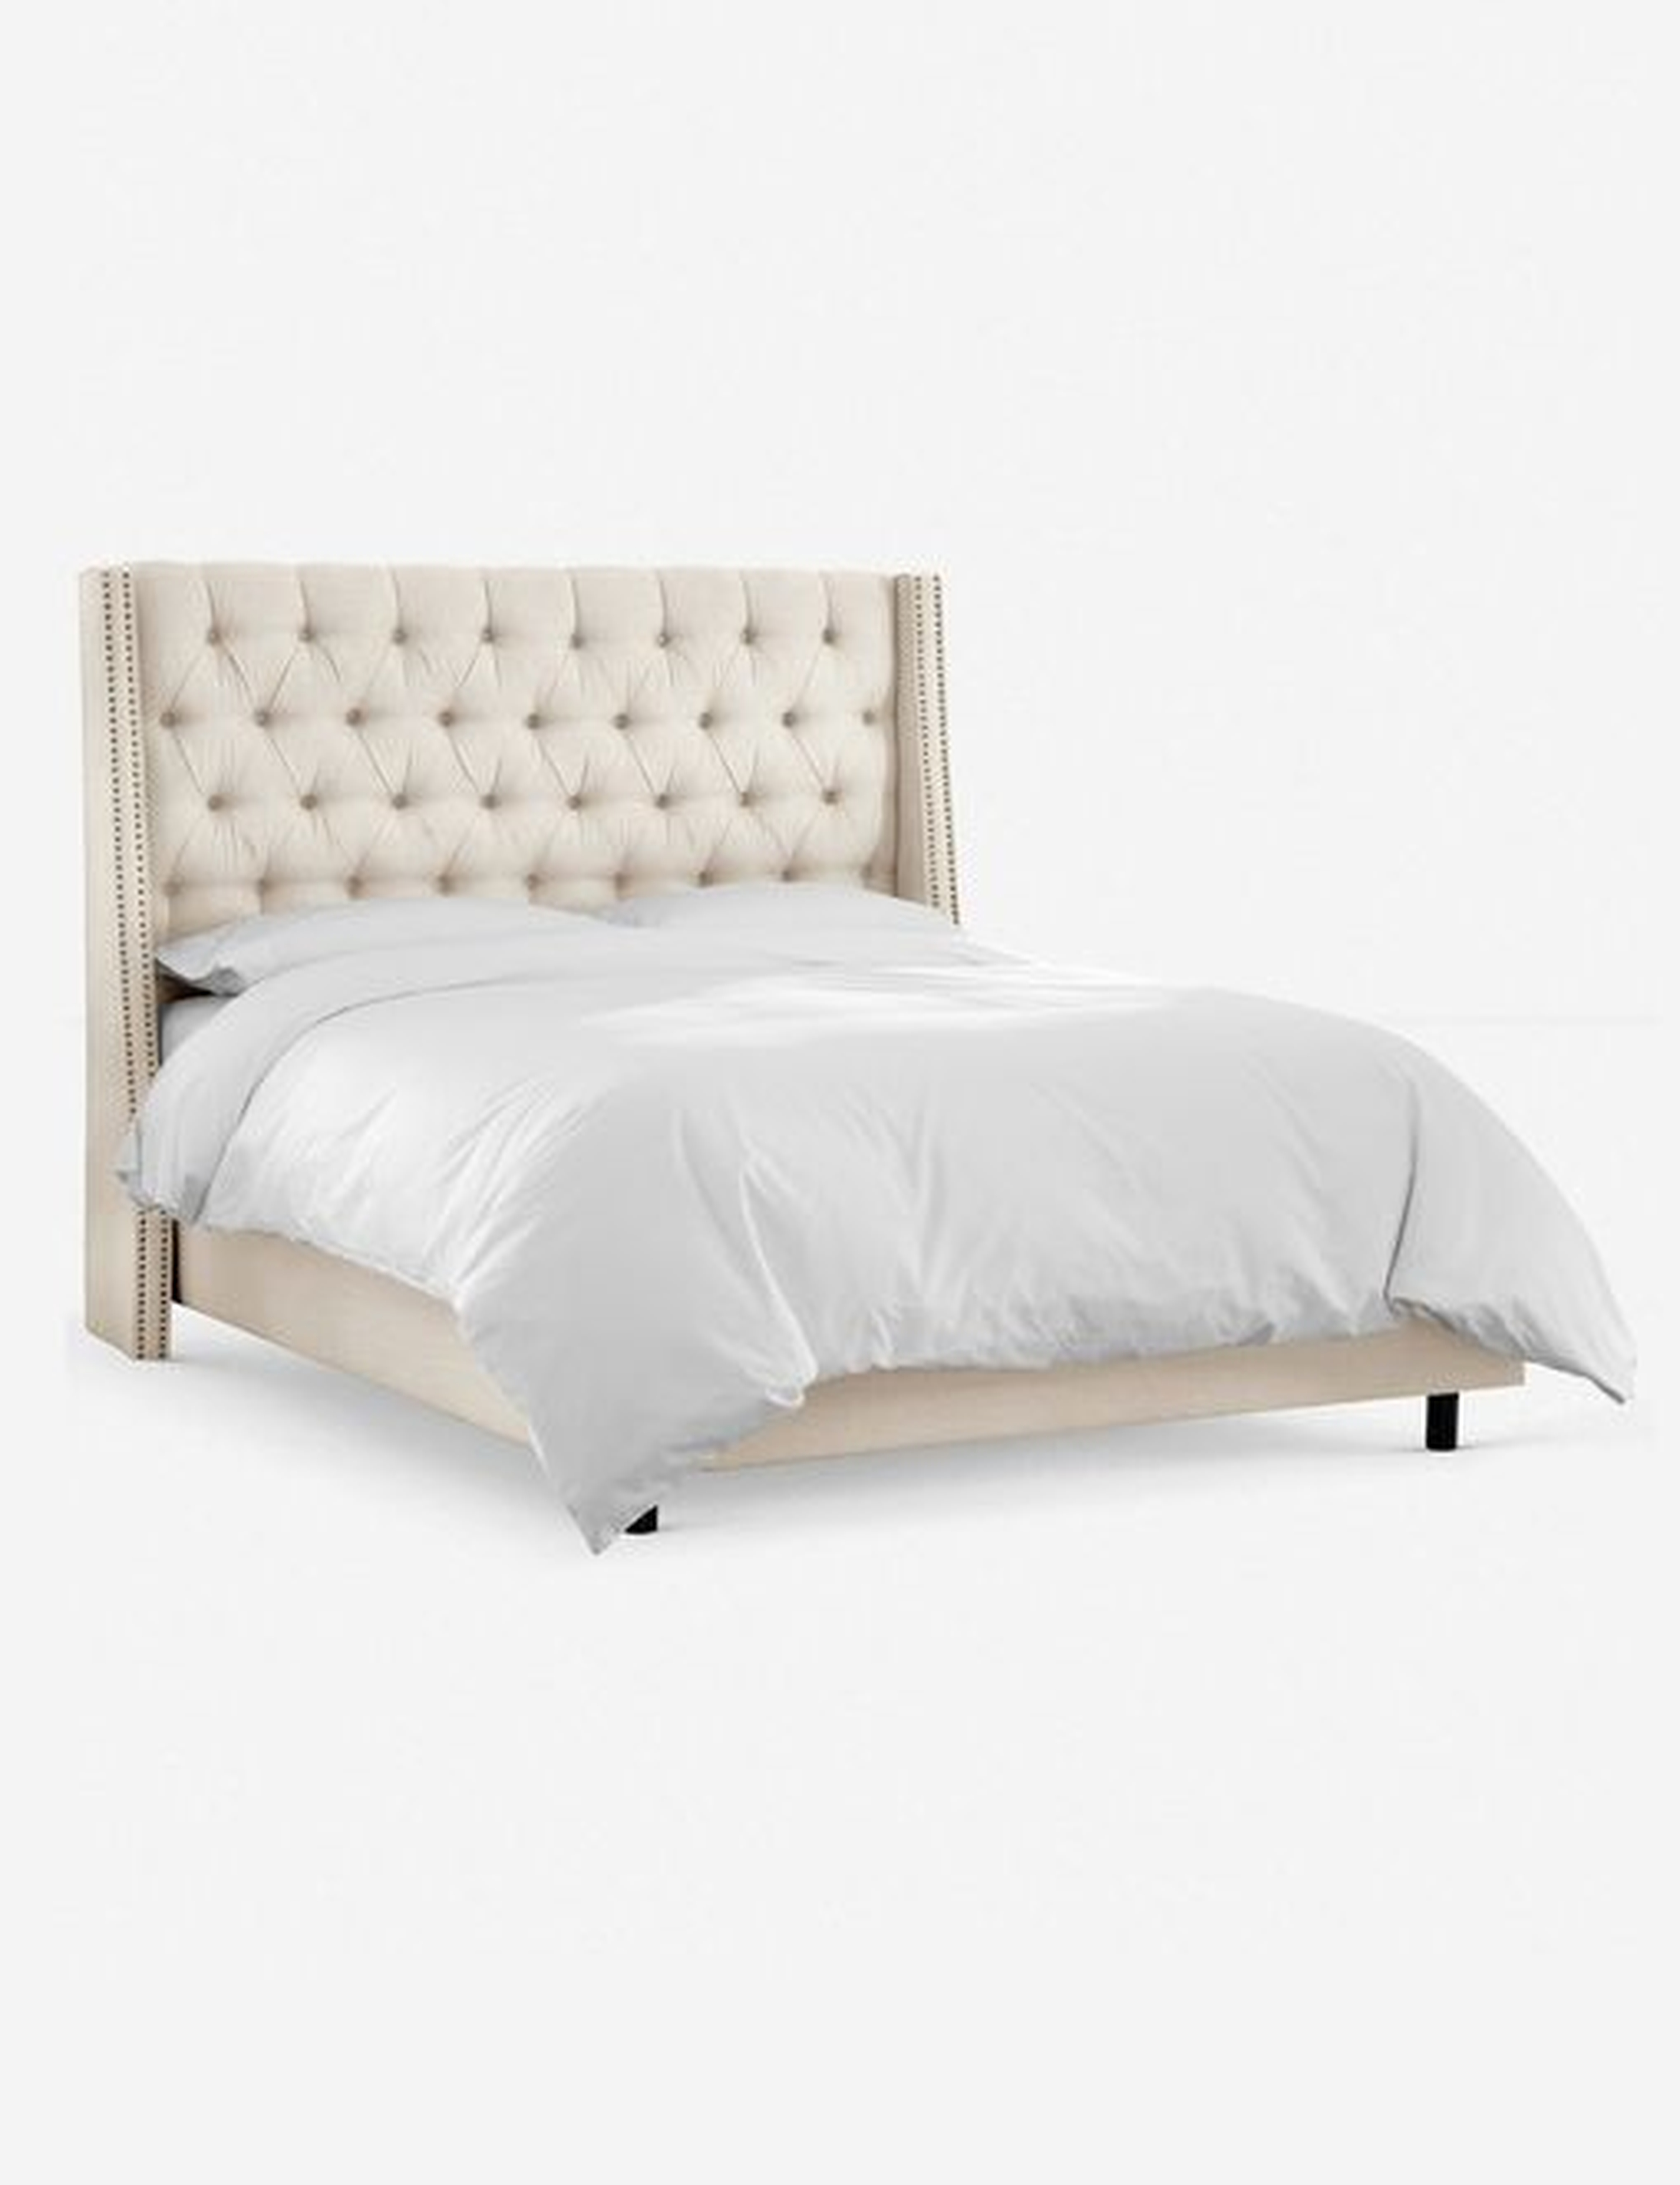 Admina Linen Tufted Bed, Talc queen - Lulu and Georgia